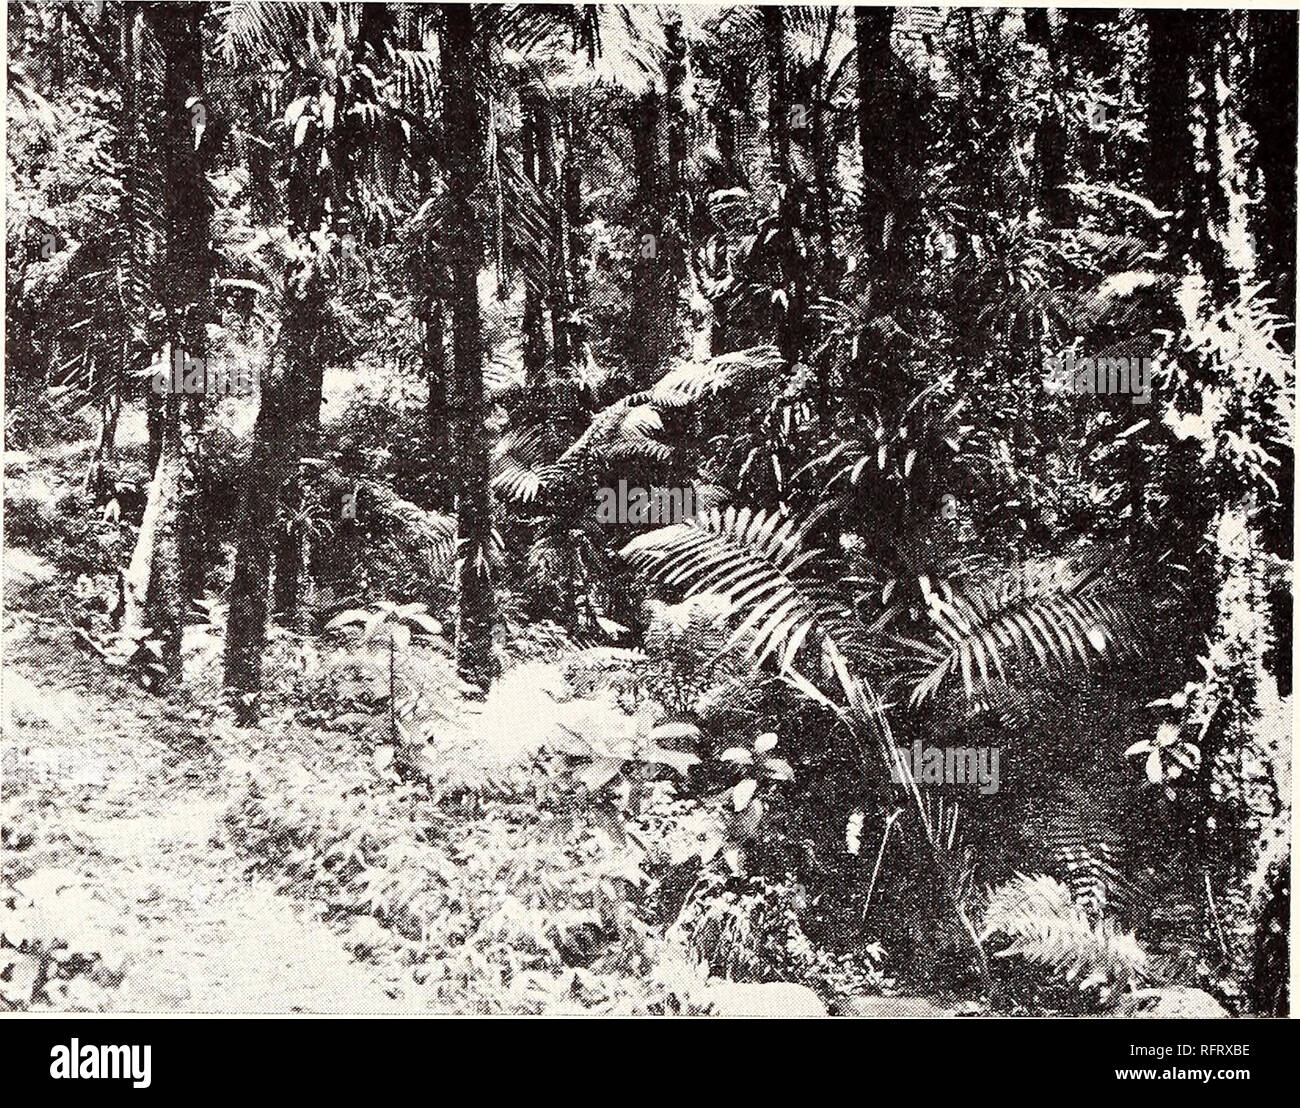 . The Caribbean forester. Forests and forestry Caribbean Area Periodicals; Forests and forestry Tropics Periodicals. 106 Caribbean Forester. Fig. 5.—Typical palm type forest in the upper La Mina Valley. This forest is purest along river courses, such as this one, or on very steep slopes. (Bosque ttpico del tipo palmar en el voile La Mina. Este bosqu'e es mas puro a lo largo de los cursos de agua (como en este caso) y en laderas muy inclinadas). (see Fig. 6). On the most exposed peaks it may be shrubby, and only 2 feet tall. Where it joins the lower types it is about 20 feet tall. The trees are Stock Photo